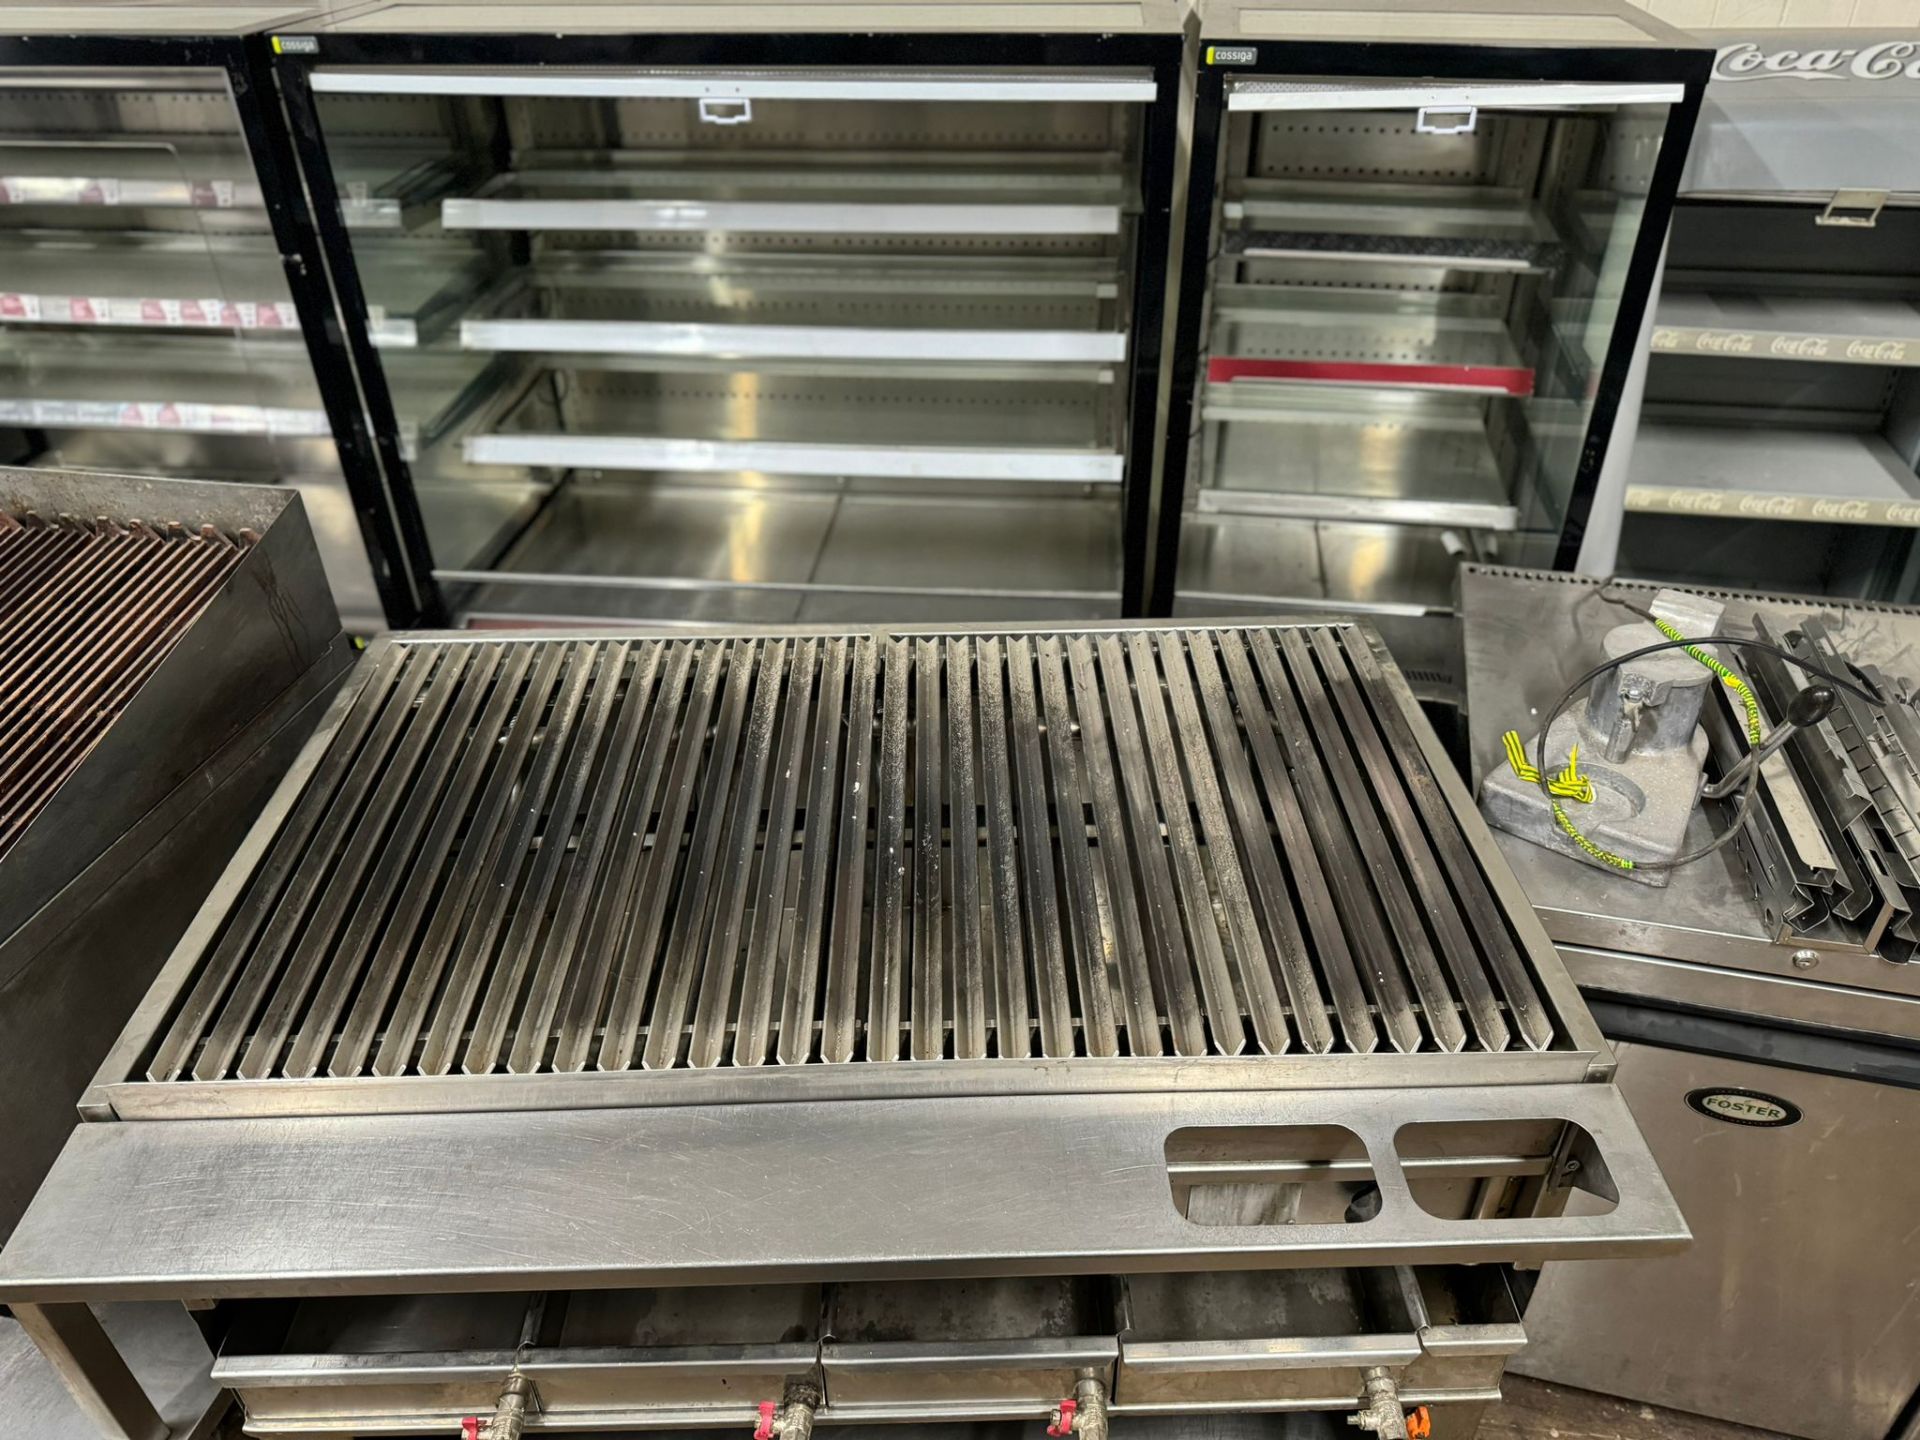 KSF CHARGRILL WITH WATER TRAY UNDER - 120 CM W - 5 BURNER NATURAL GAS BROILER  - Image 3 of 6